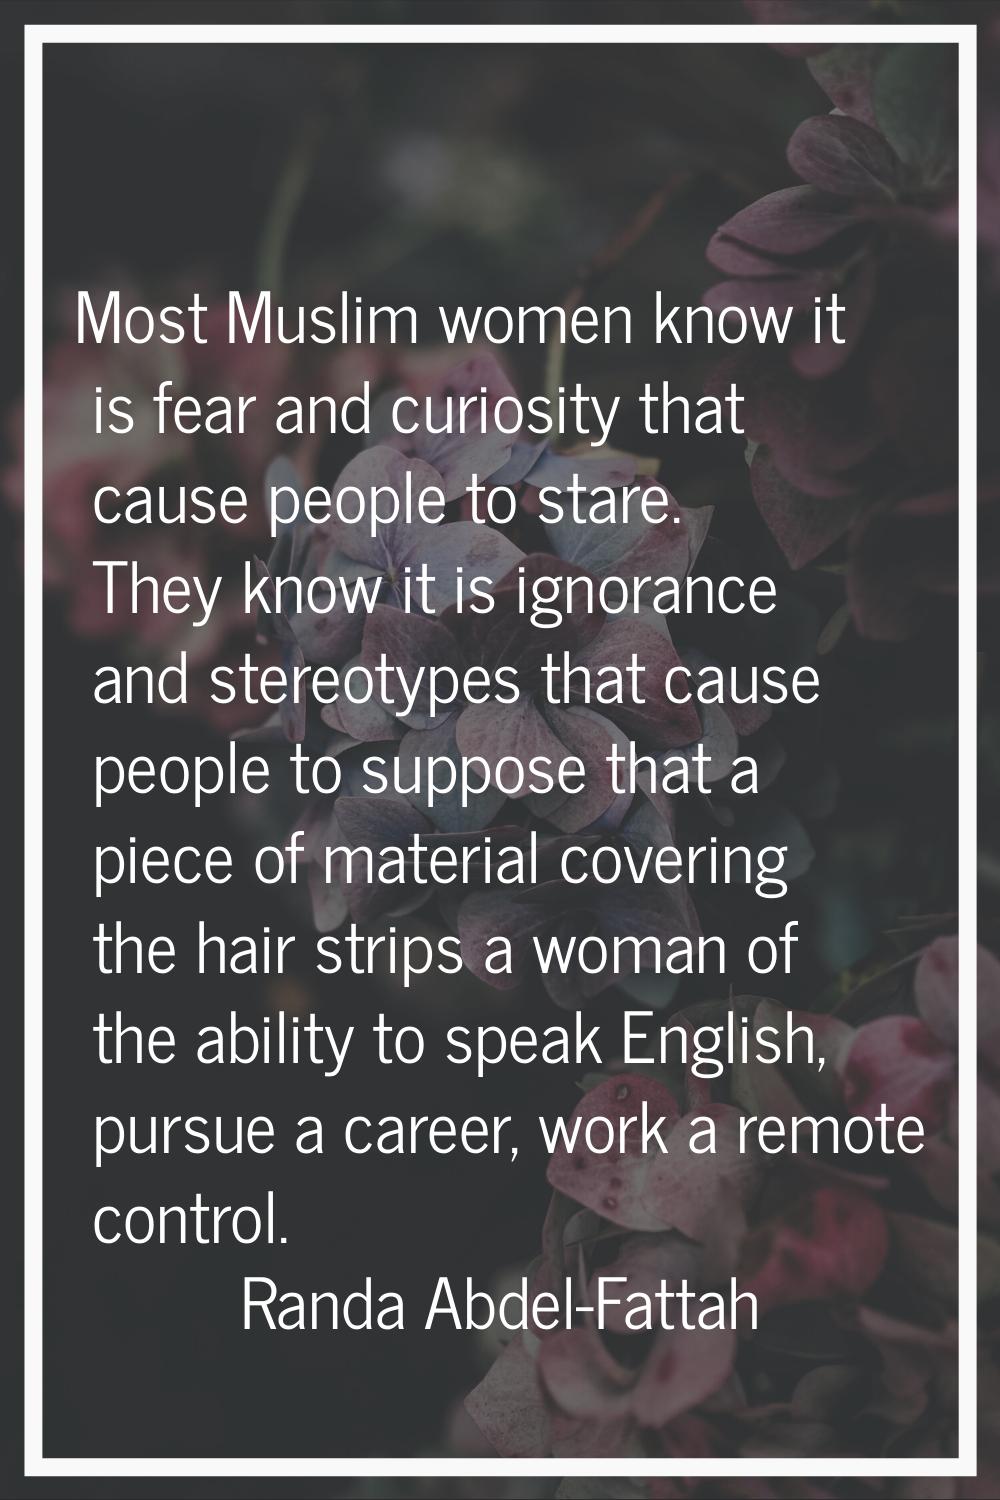 Most Muslim women know it is fear and curiosity that cause people to stare. They know it is ignoran